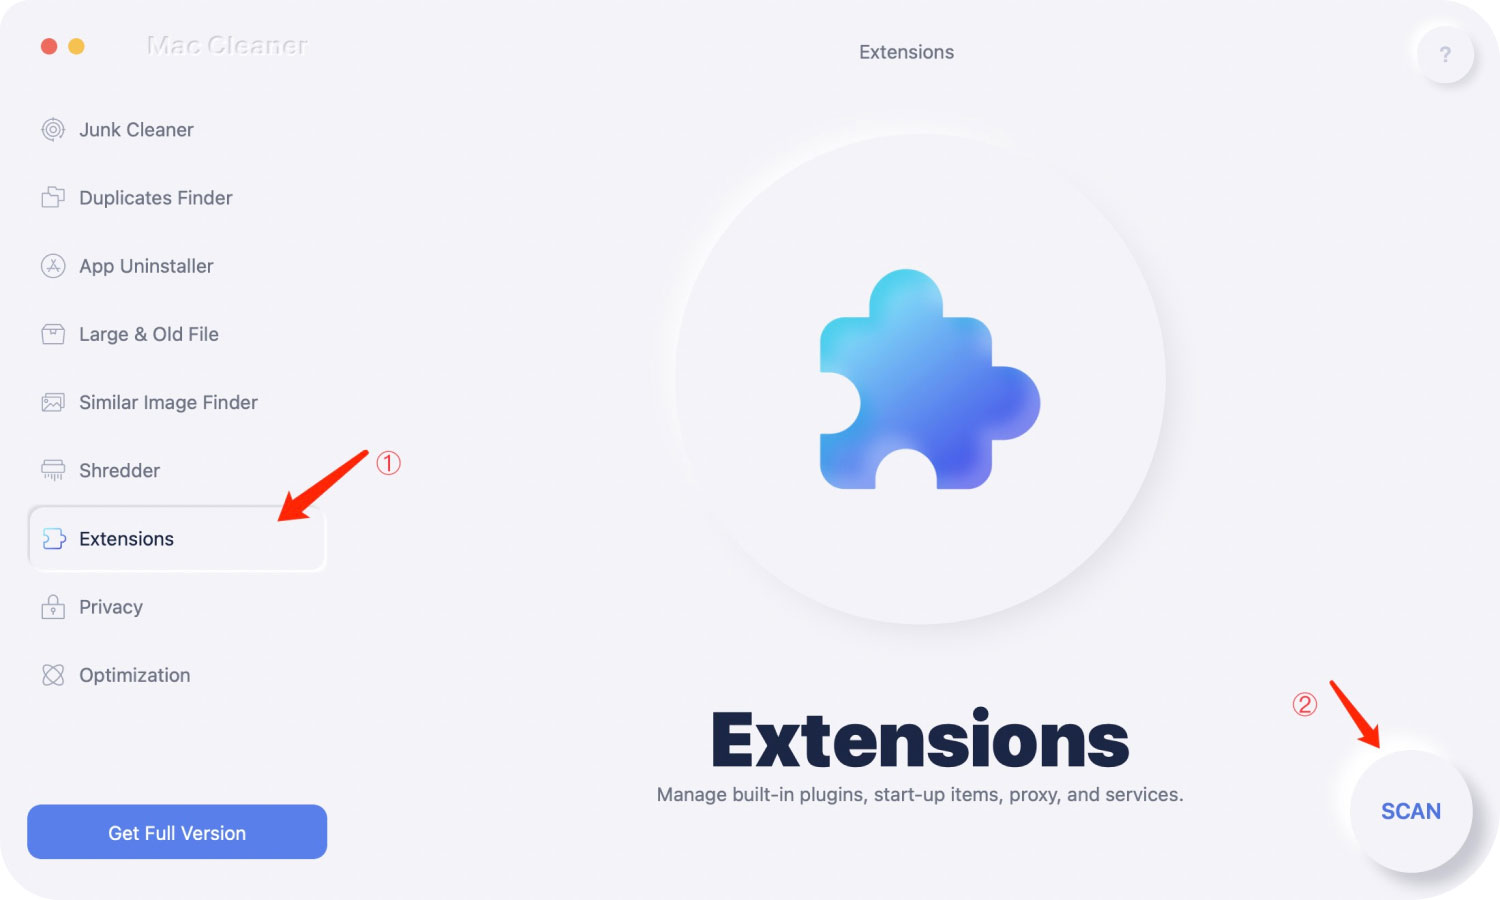 Manage Extensions